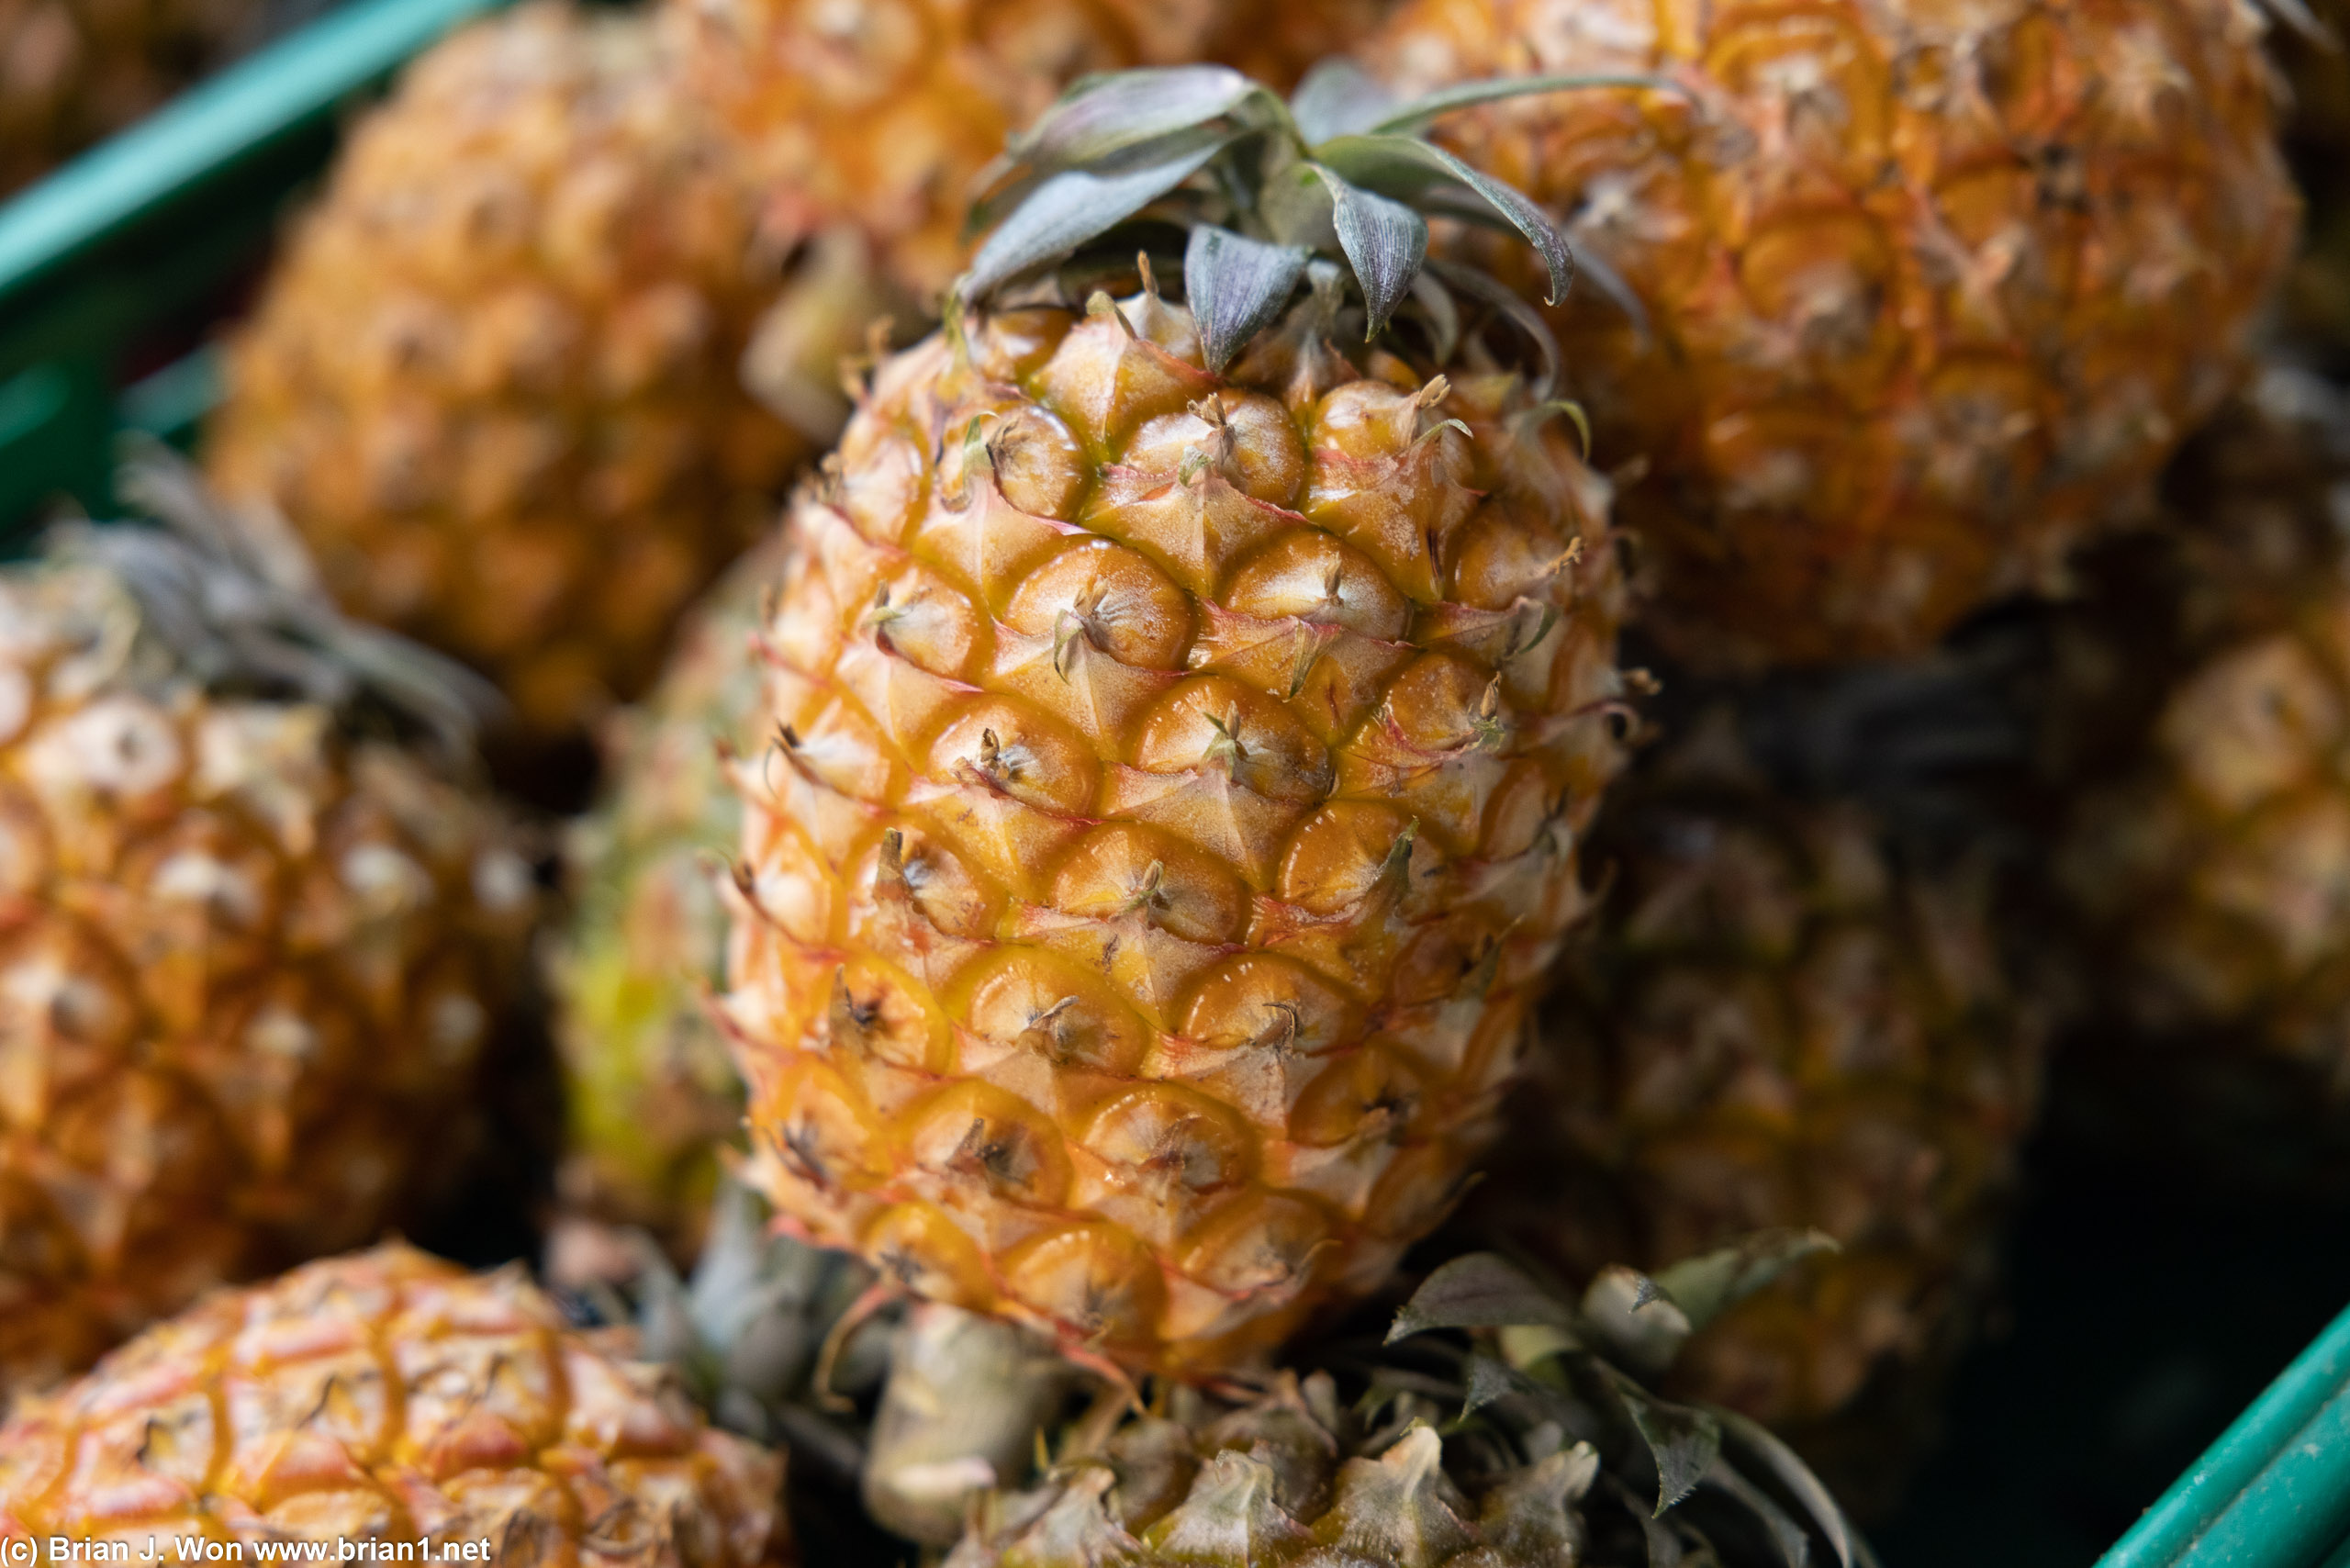 Azores pineapples at the farmers' market.